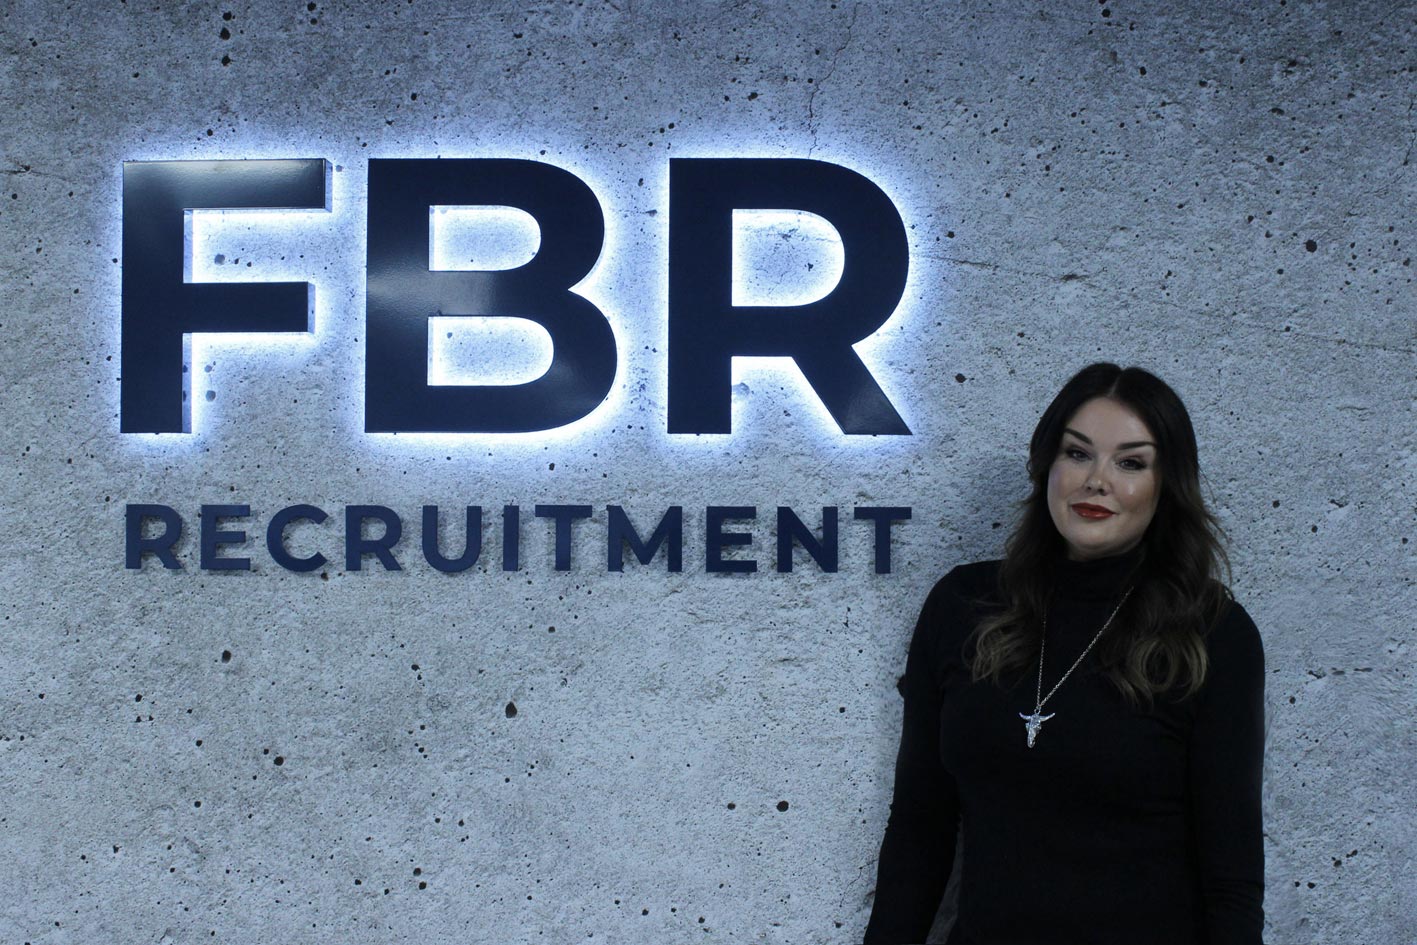 Danielle Fox is a Senior Consultant at FBR Recruitment, specialising in office recruitment (roles include reception, secretarial, account managers, team leaders etc.)